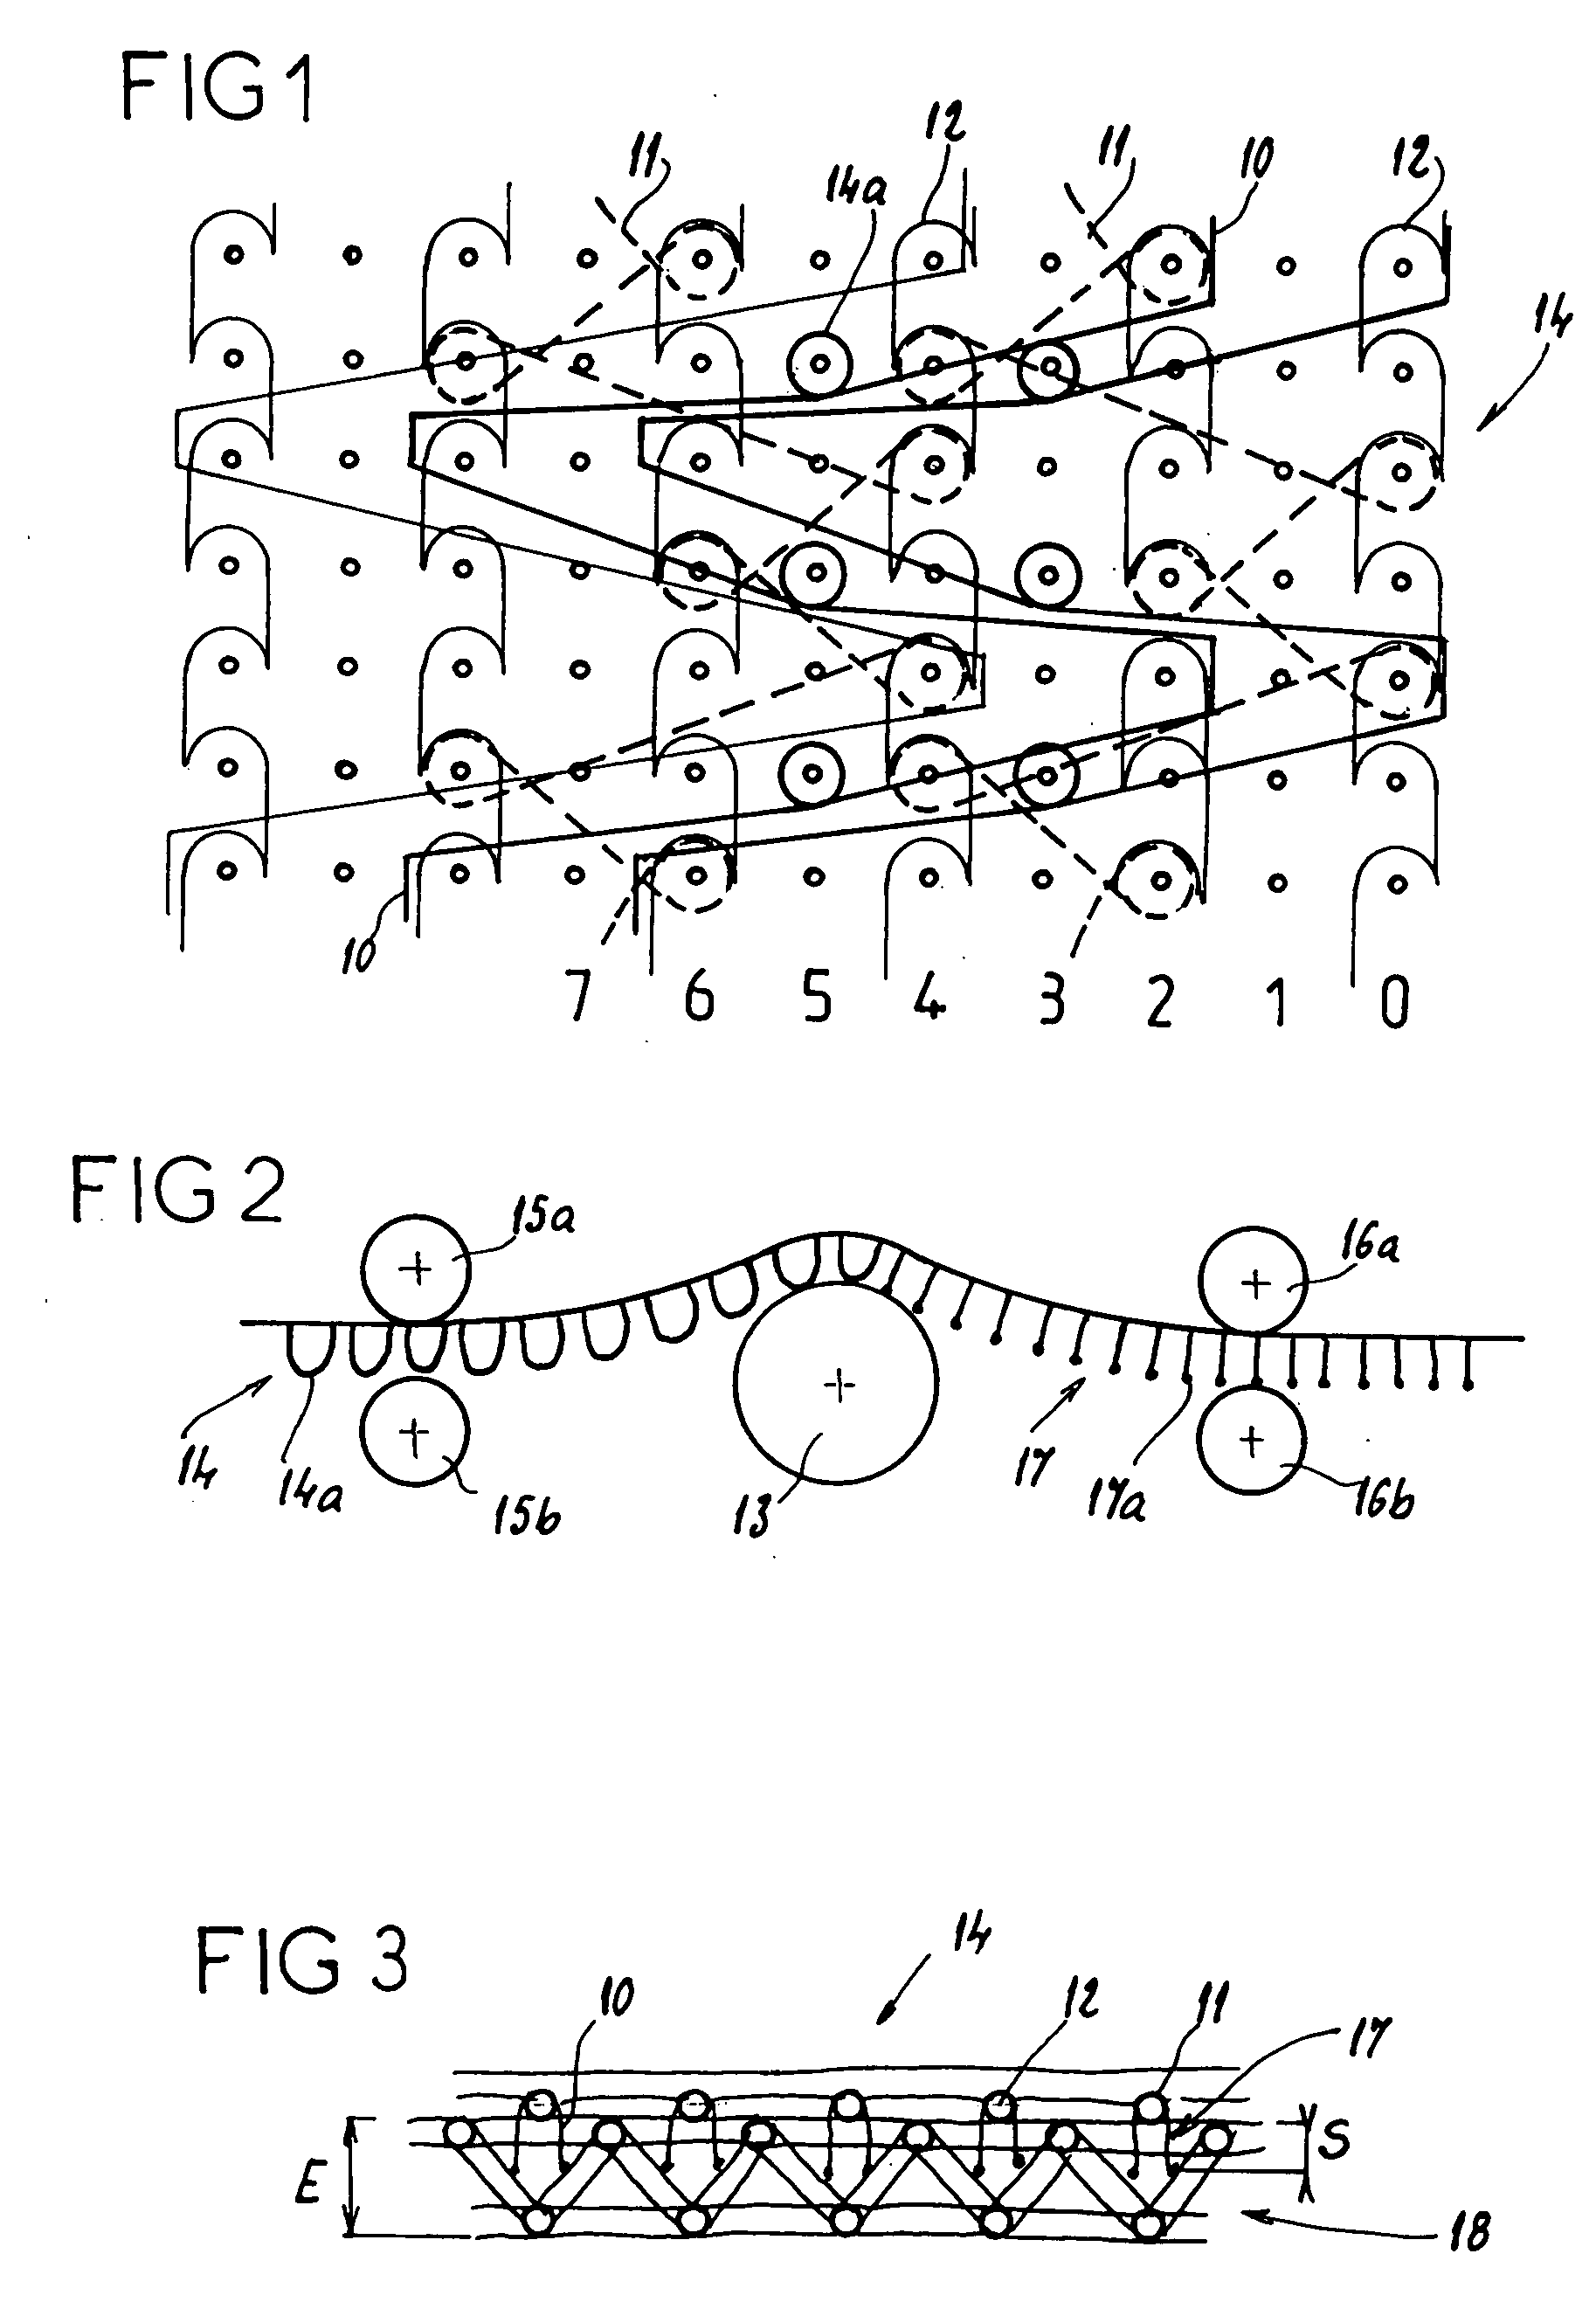 Adhering prosthetic knitting fabric, method for making same and reinforcement implant for treating parietal deficiencies